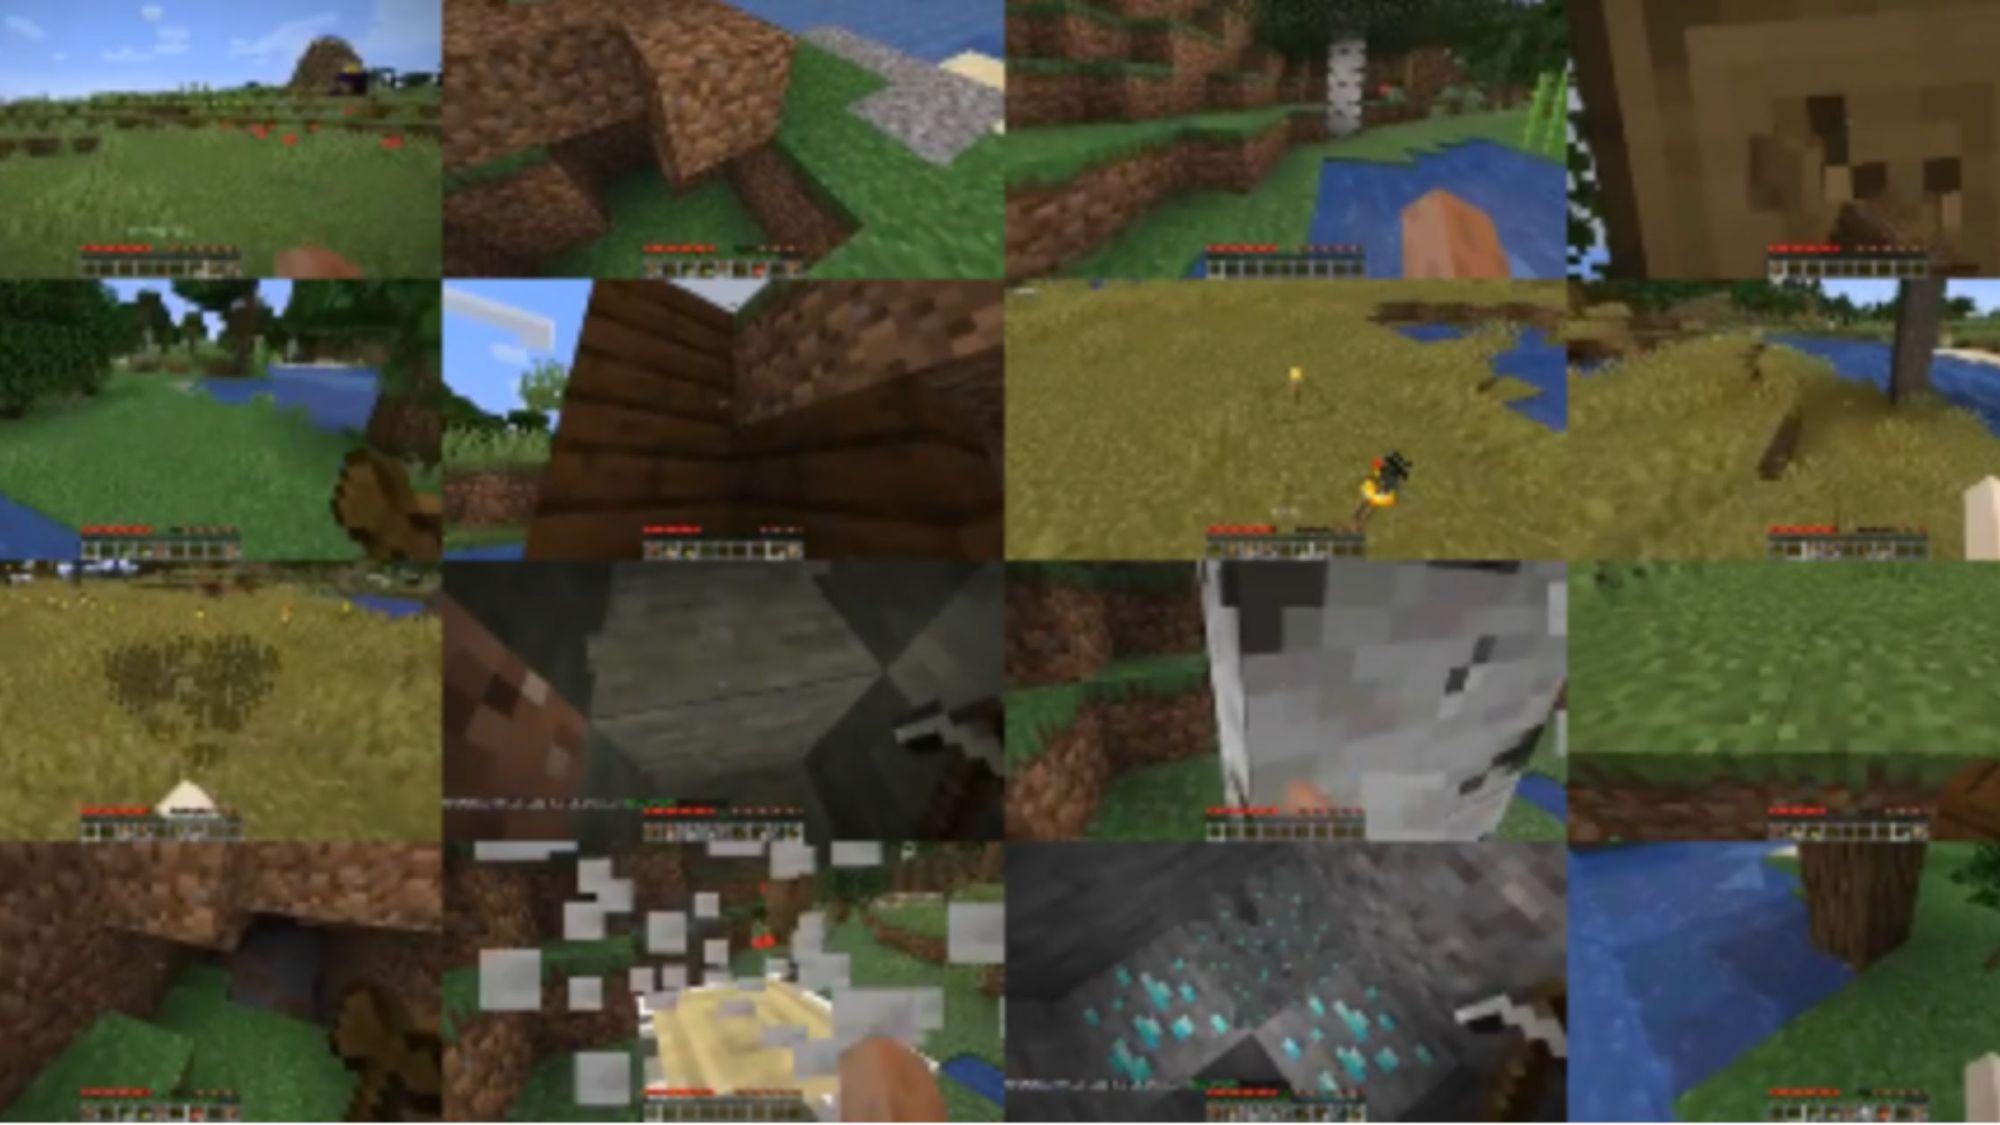 Video-based advance learning to play Minecraft (VPT)